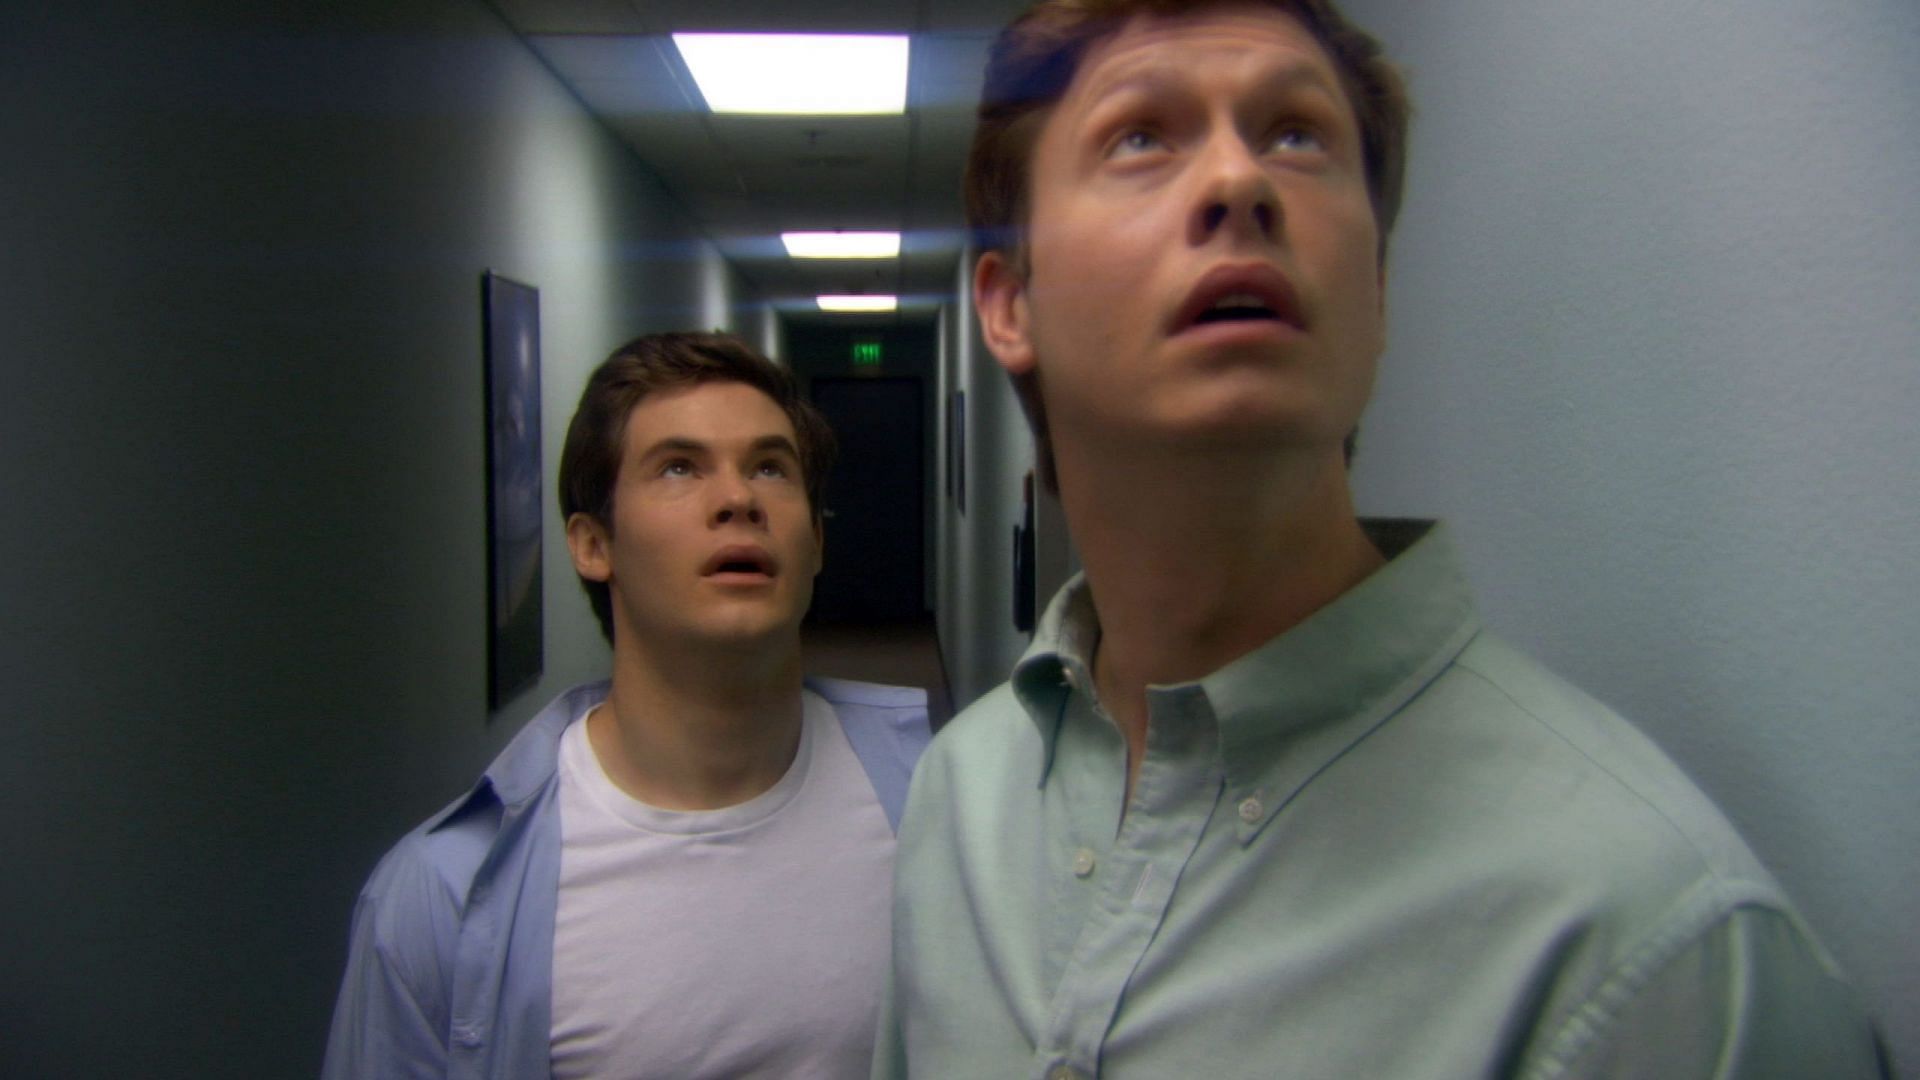 A still from Workaholics. (Photo via Comedy Central)